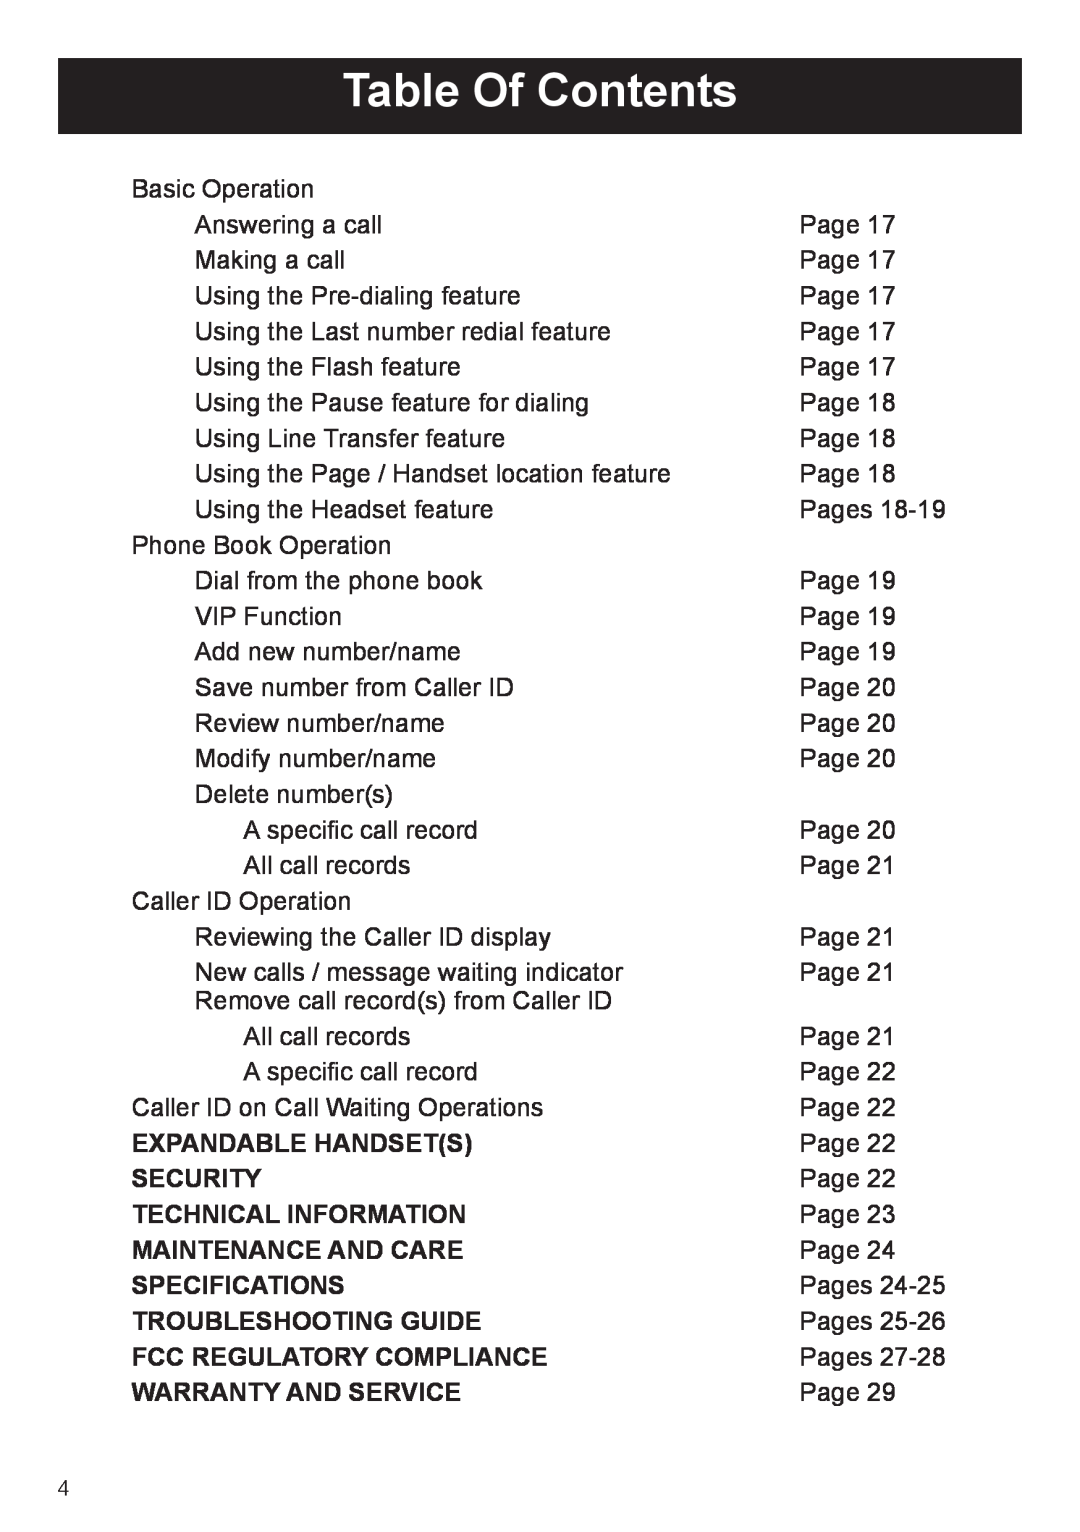 ClearSounds A50 user manual Table Of Contents, Expandable Handsets, Security, Technical Information, Maintenance And Care 